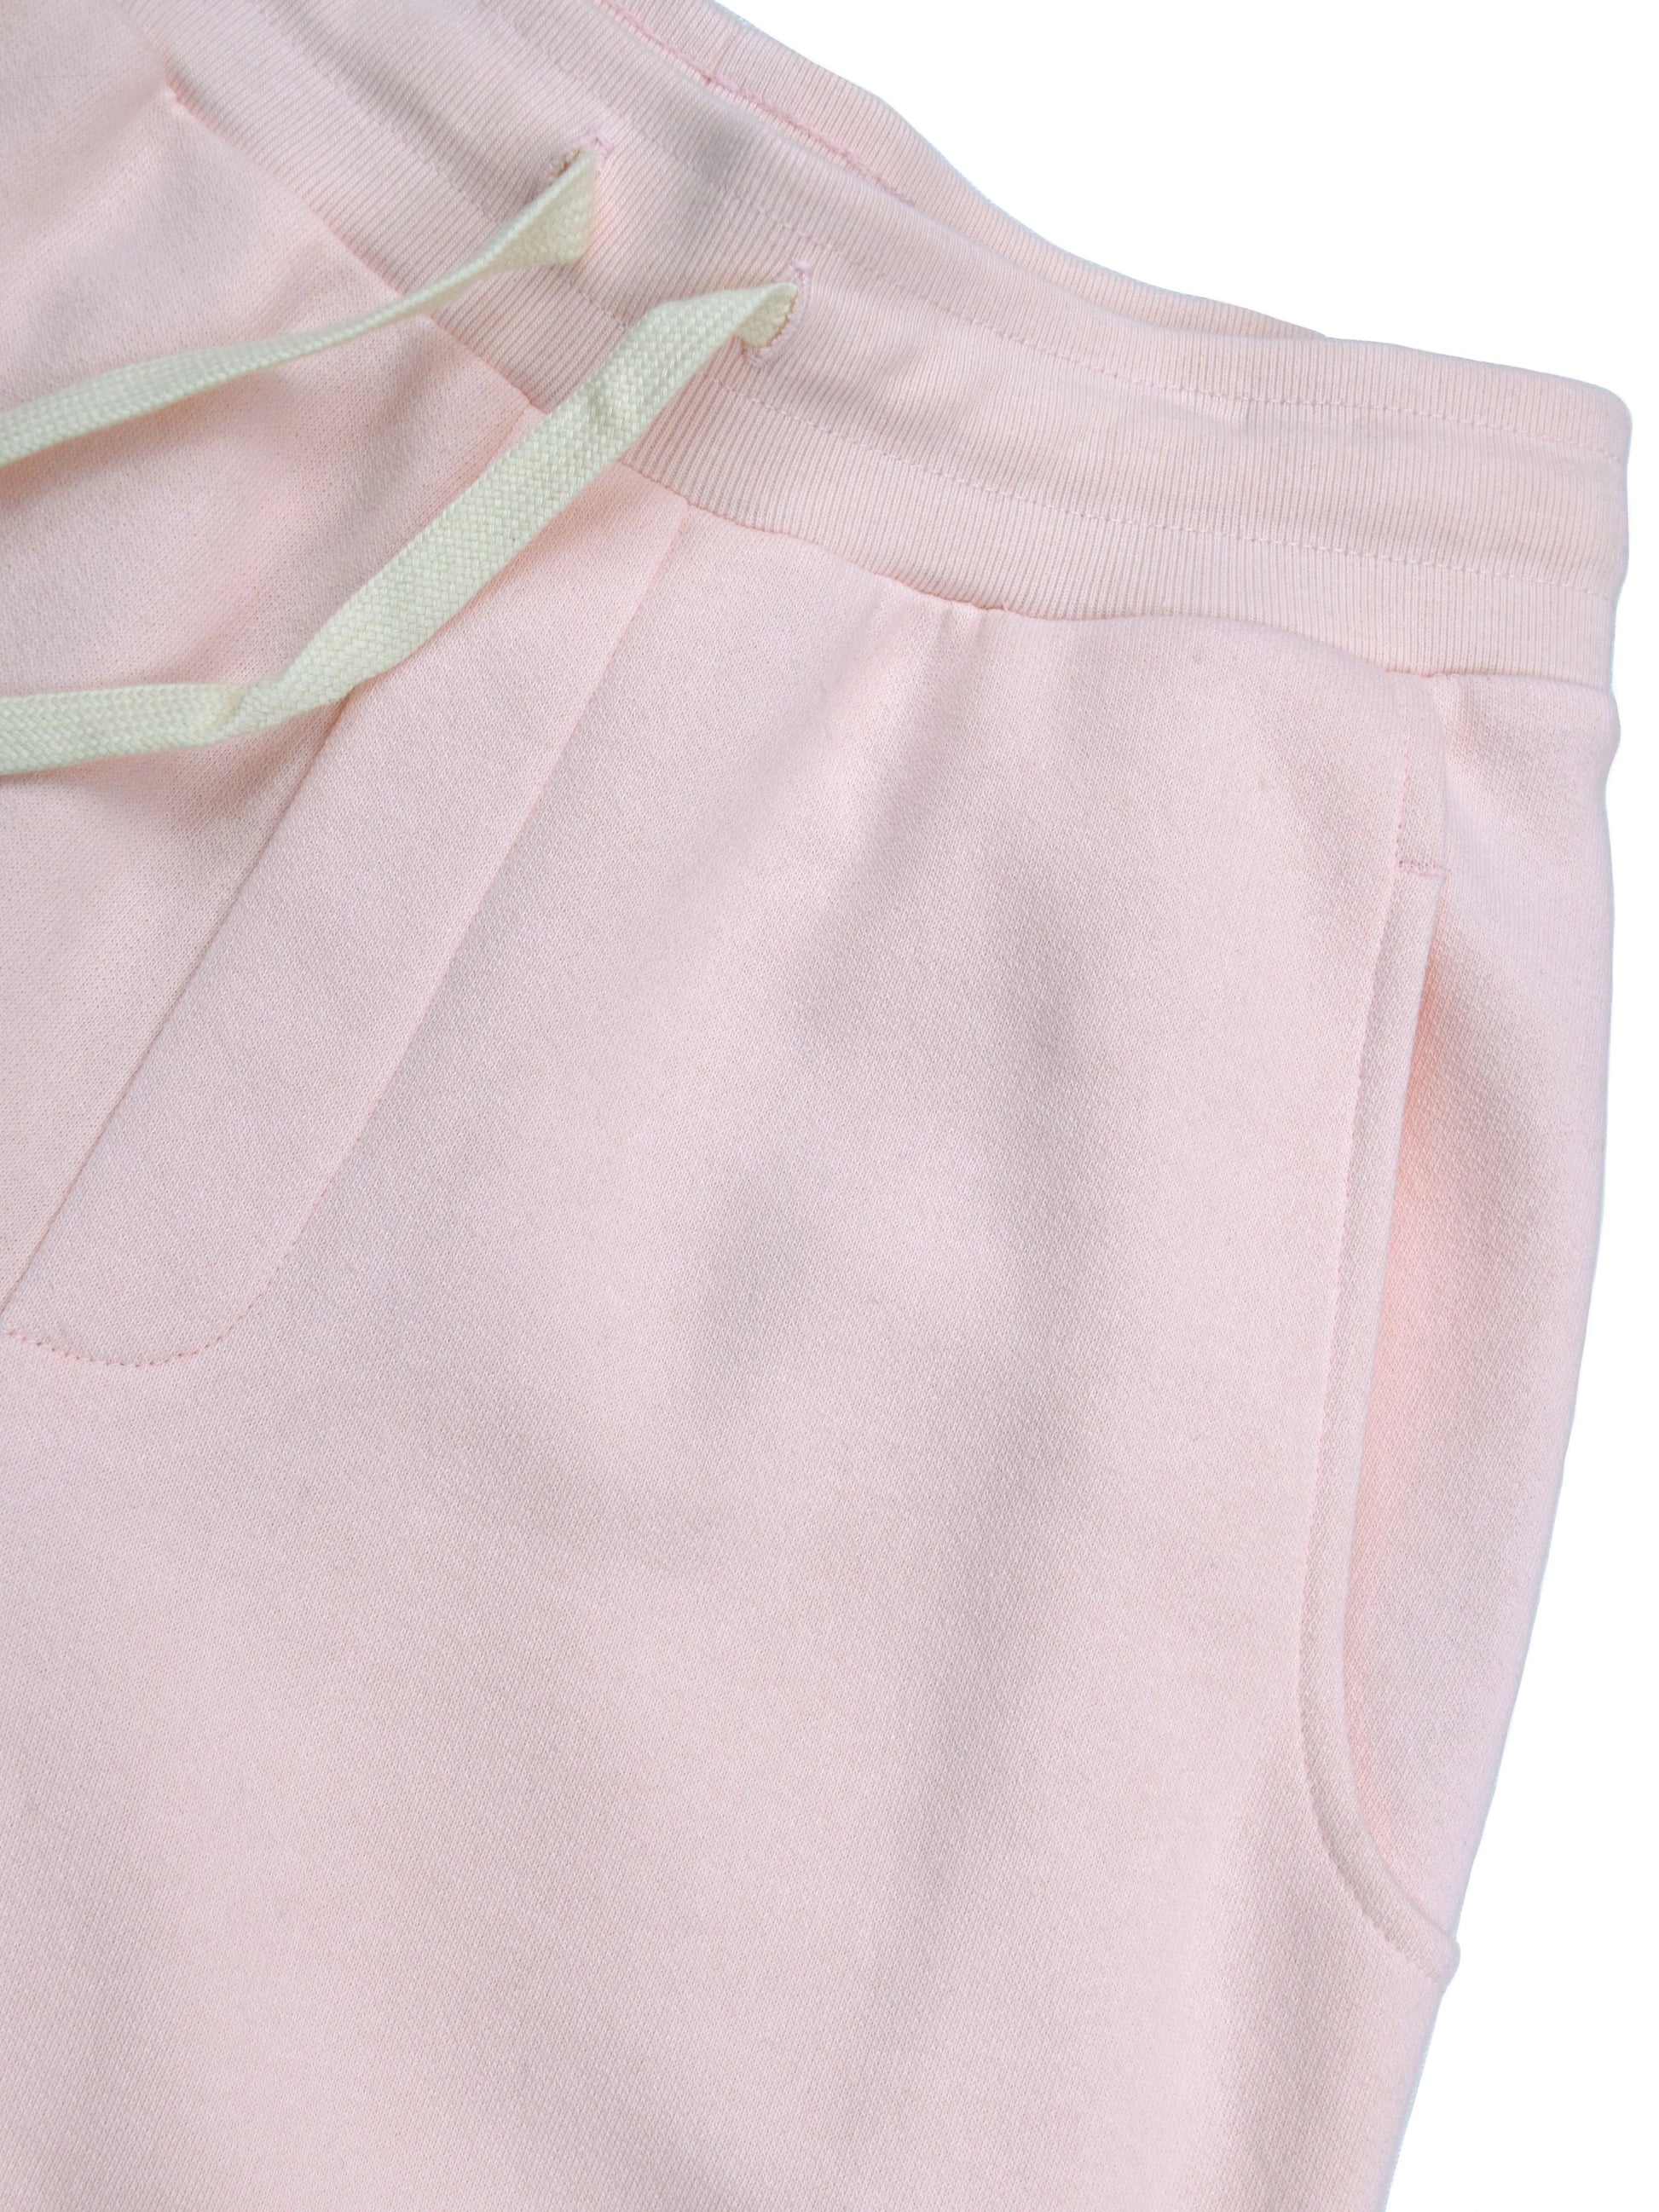 Close up of Cotton Material, Side Pockets, and White Drawstrings.